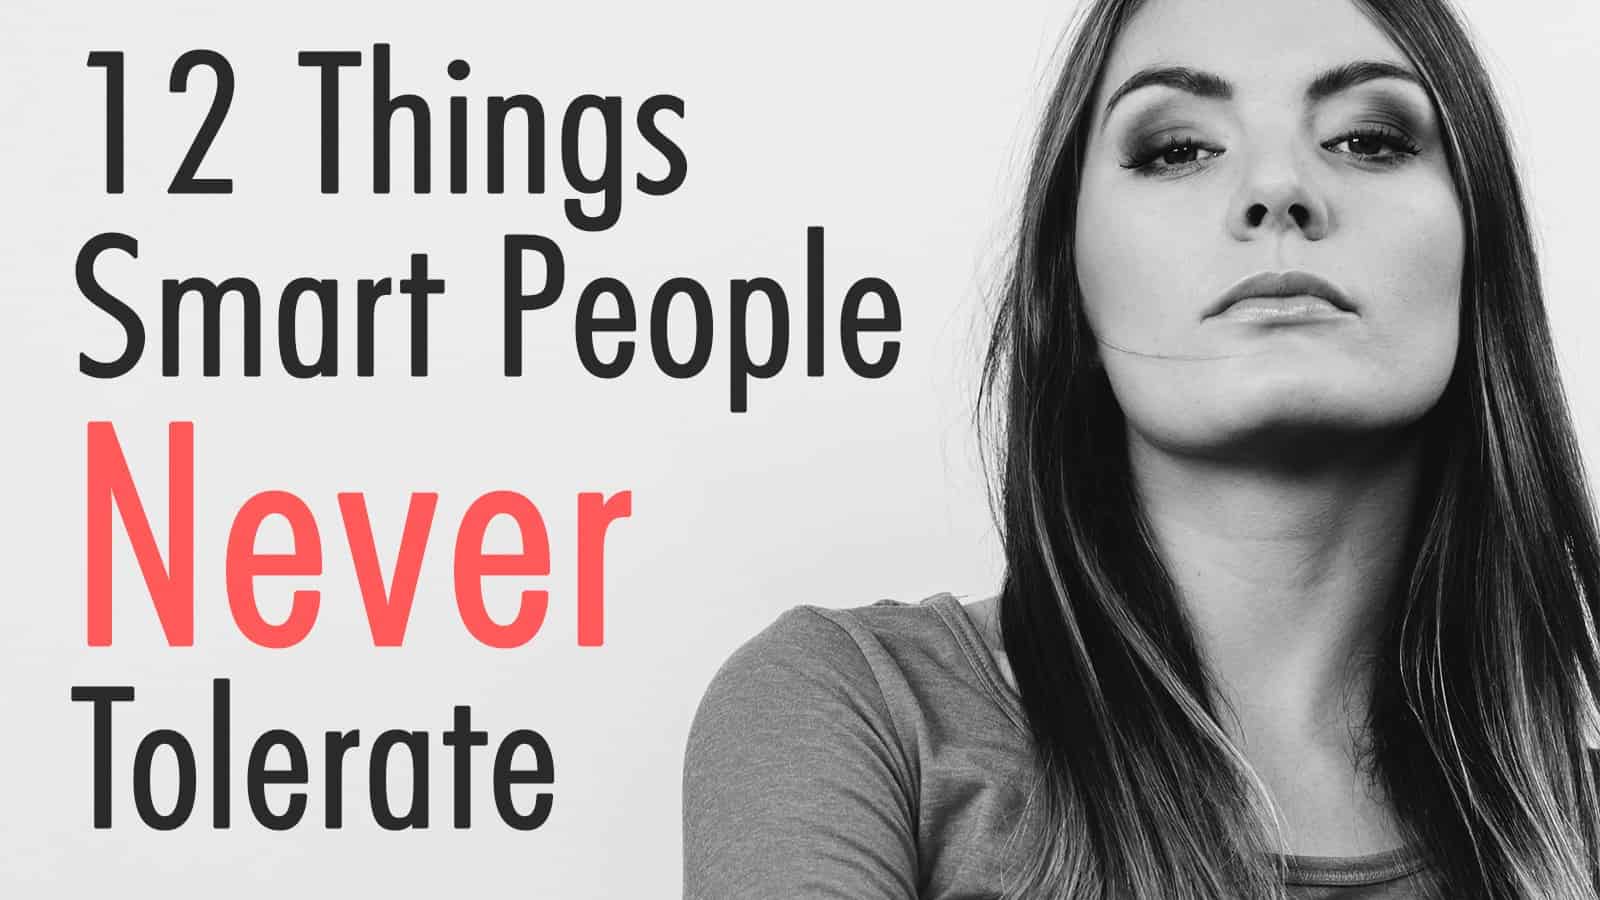 12 Things Smart People Never Tolerate